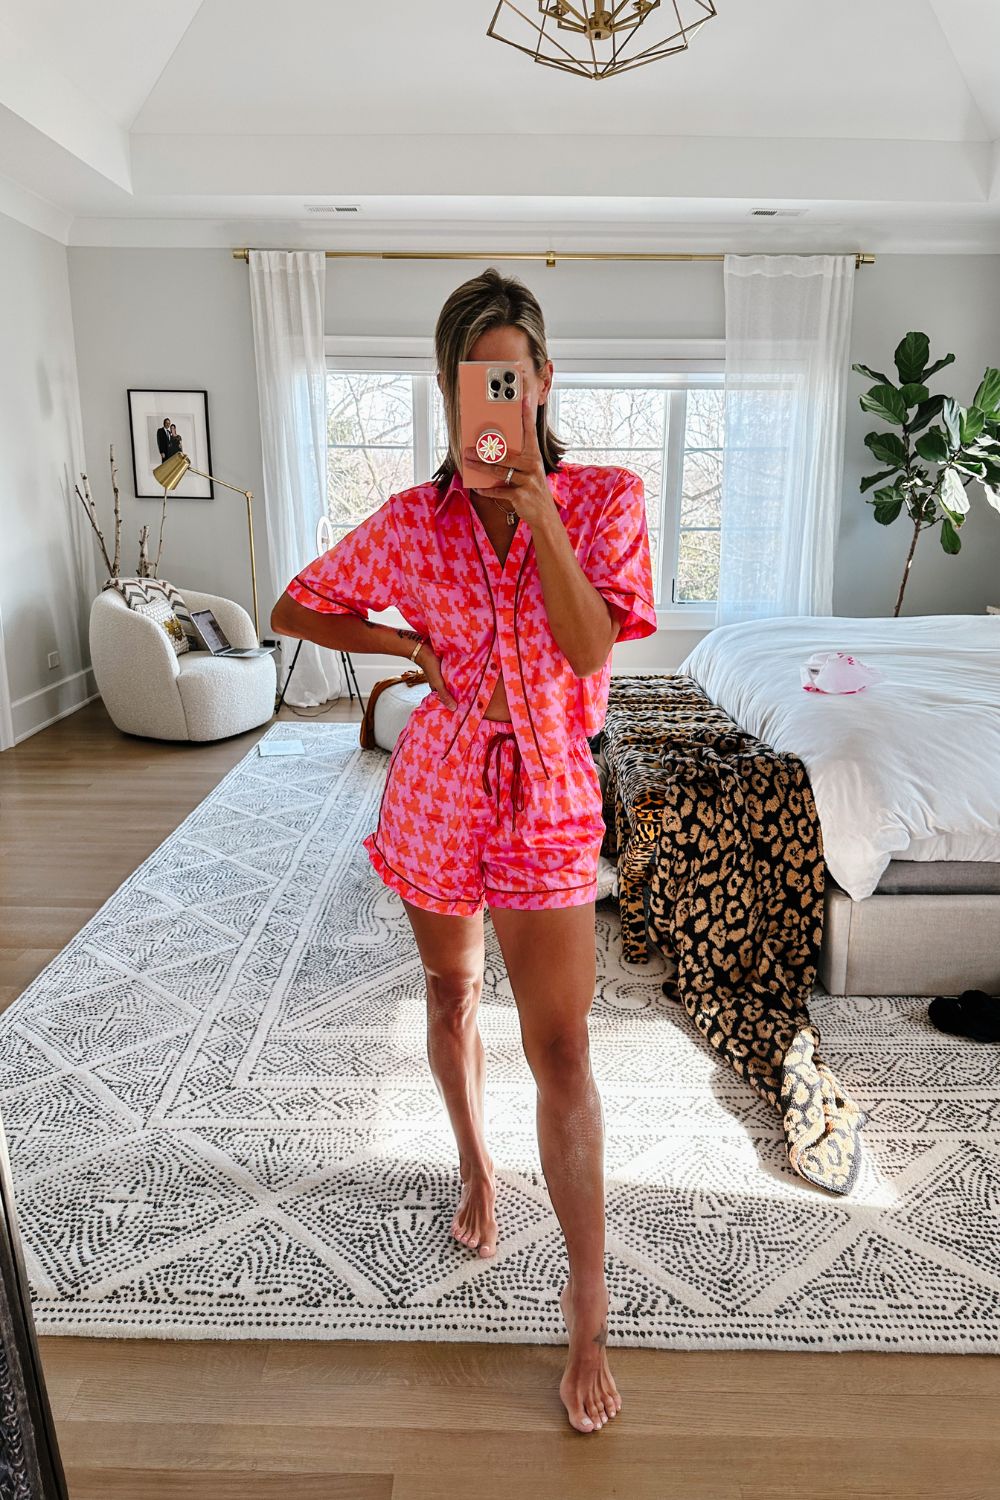 Suzanne wearing a pair of luxe satin pajamas from parade 